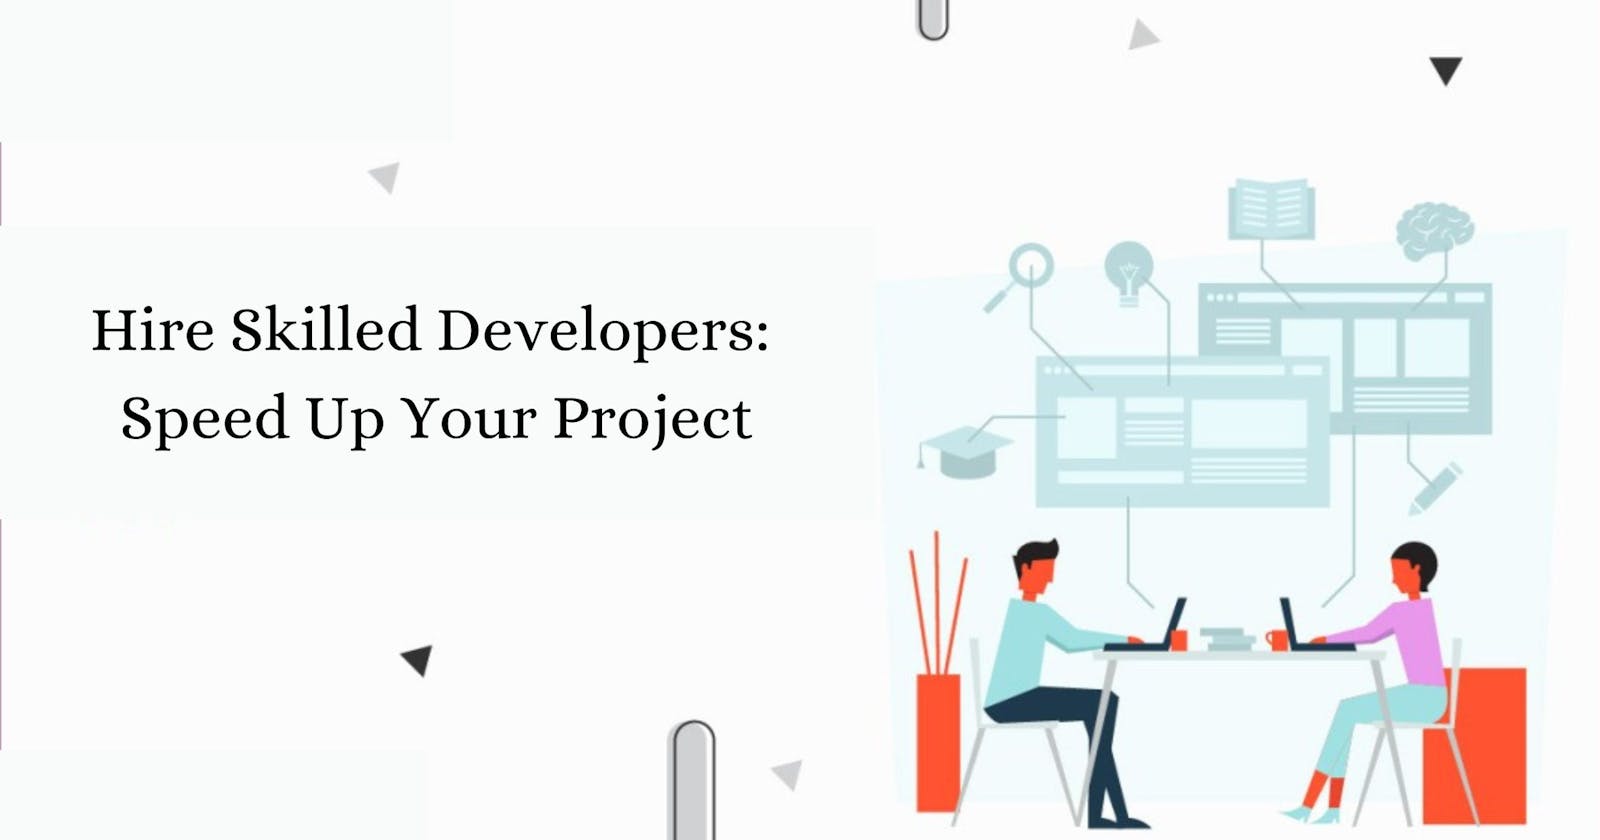 Hire Skilled Developers | Hire Dedicated Developers in the USA